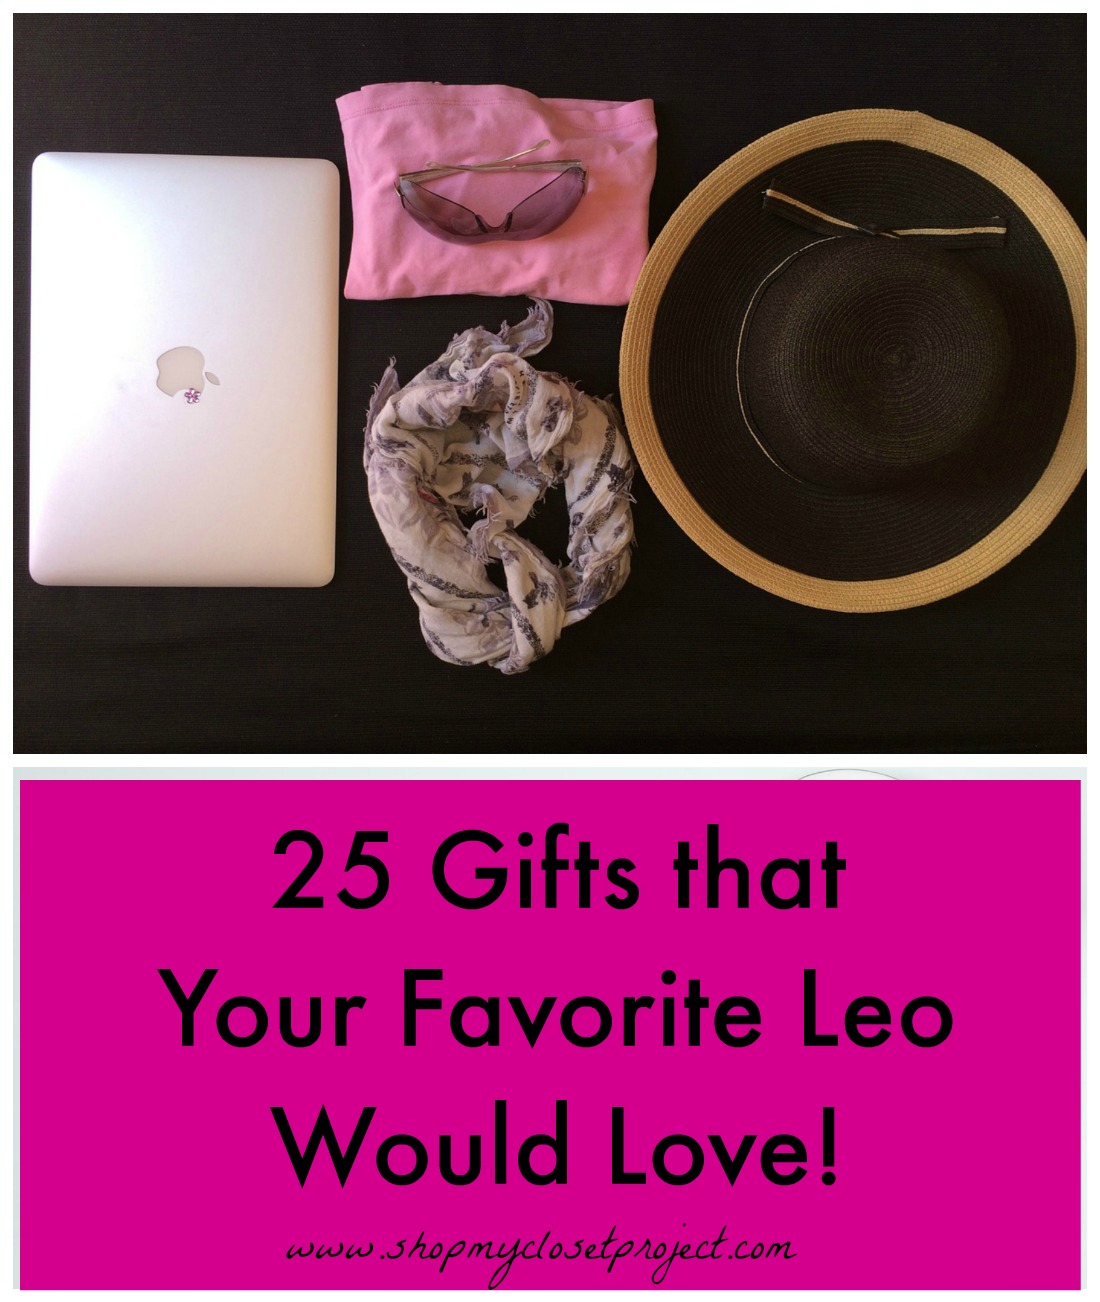 25 Gifts that Your Favorite Leo Would Love!